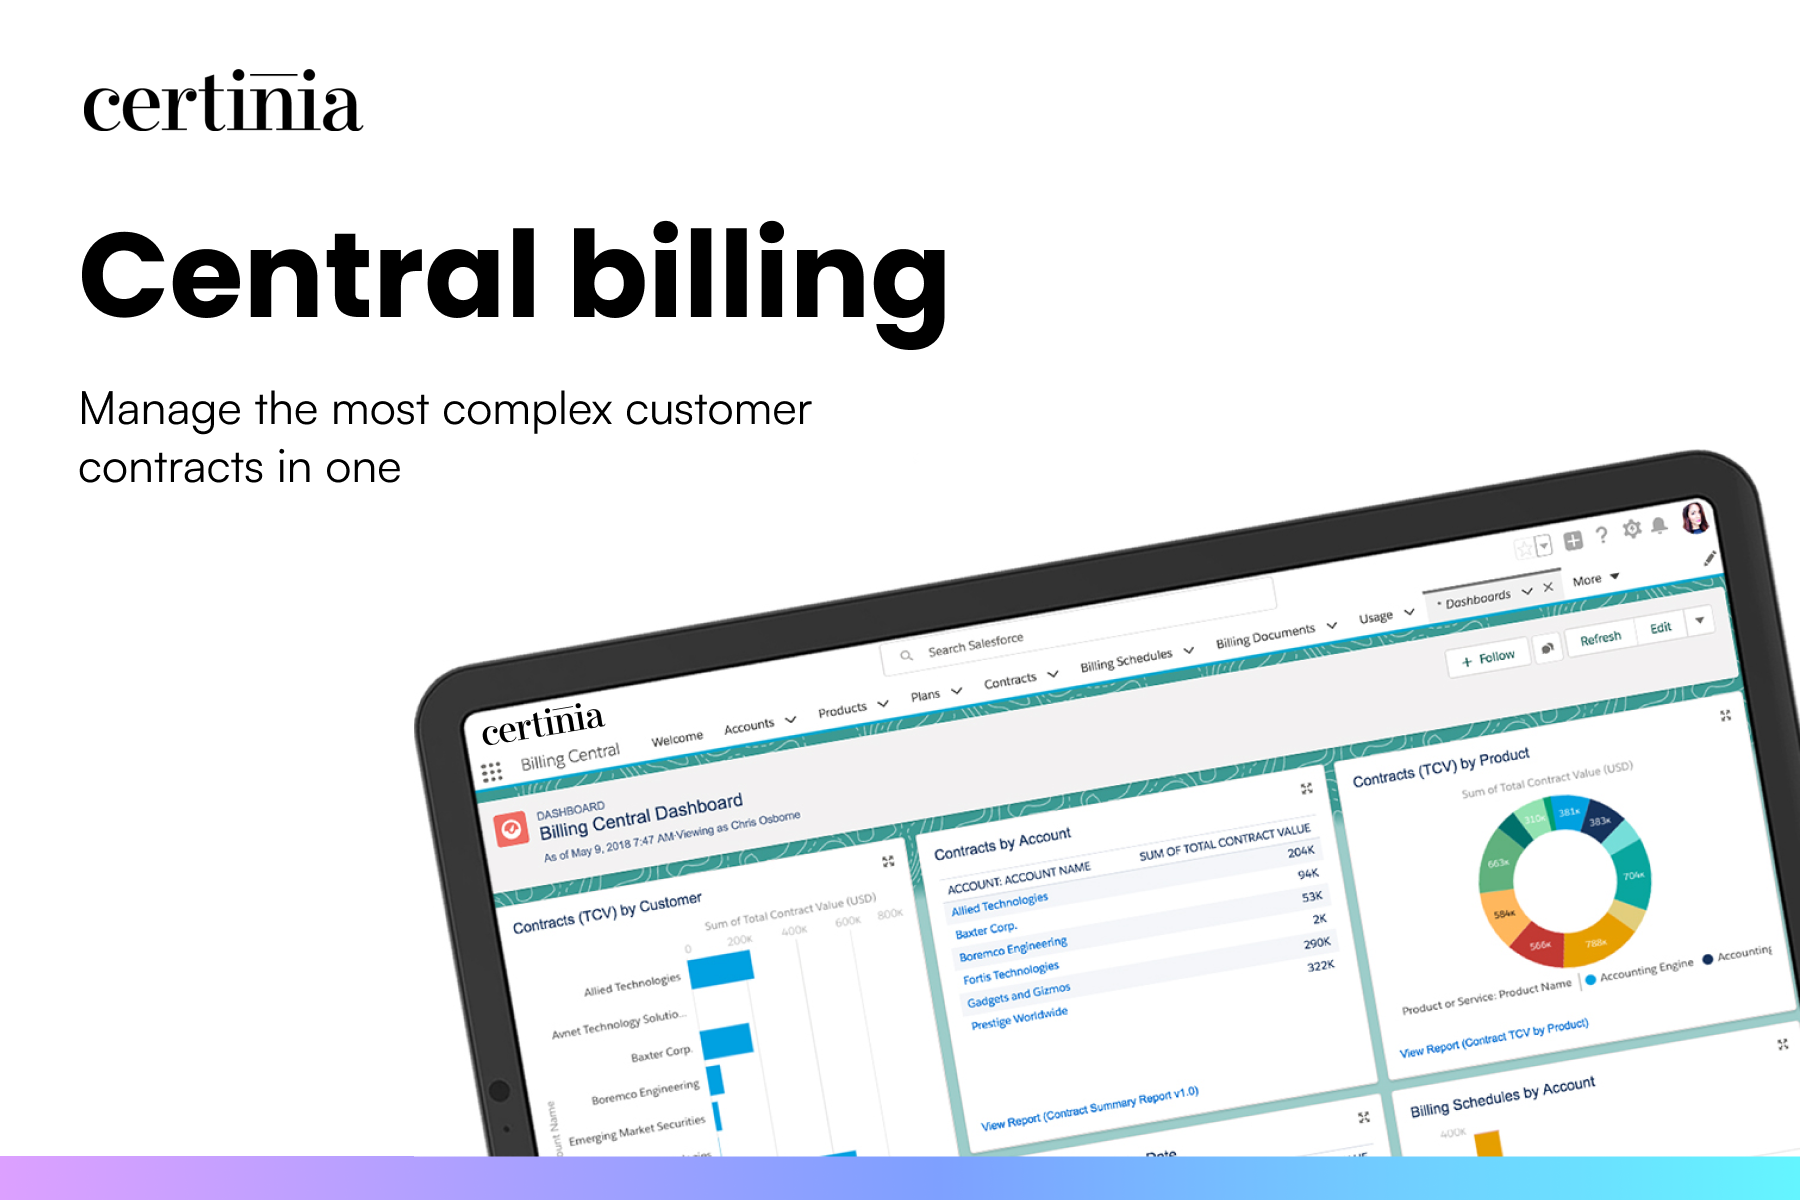 Manage the most complex customer contracts in one